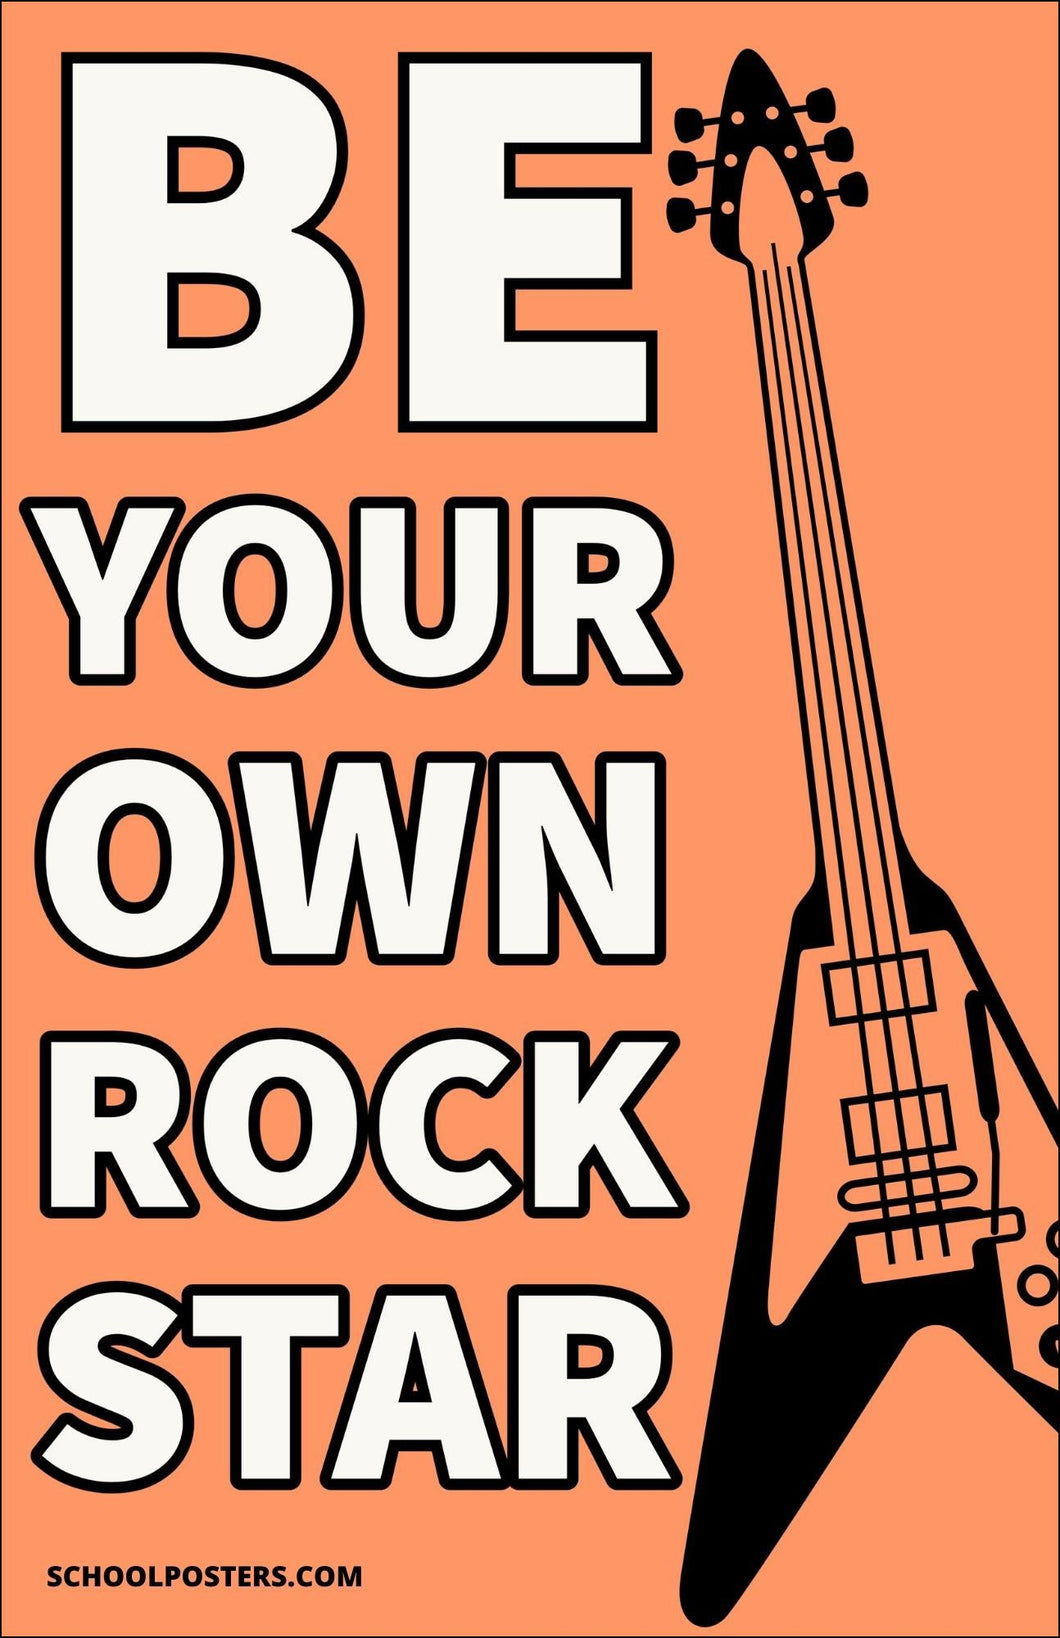 Be Your Own Rock Star Poster